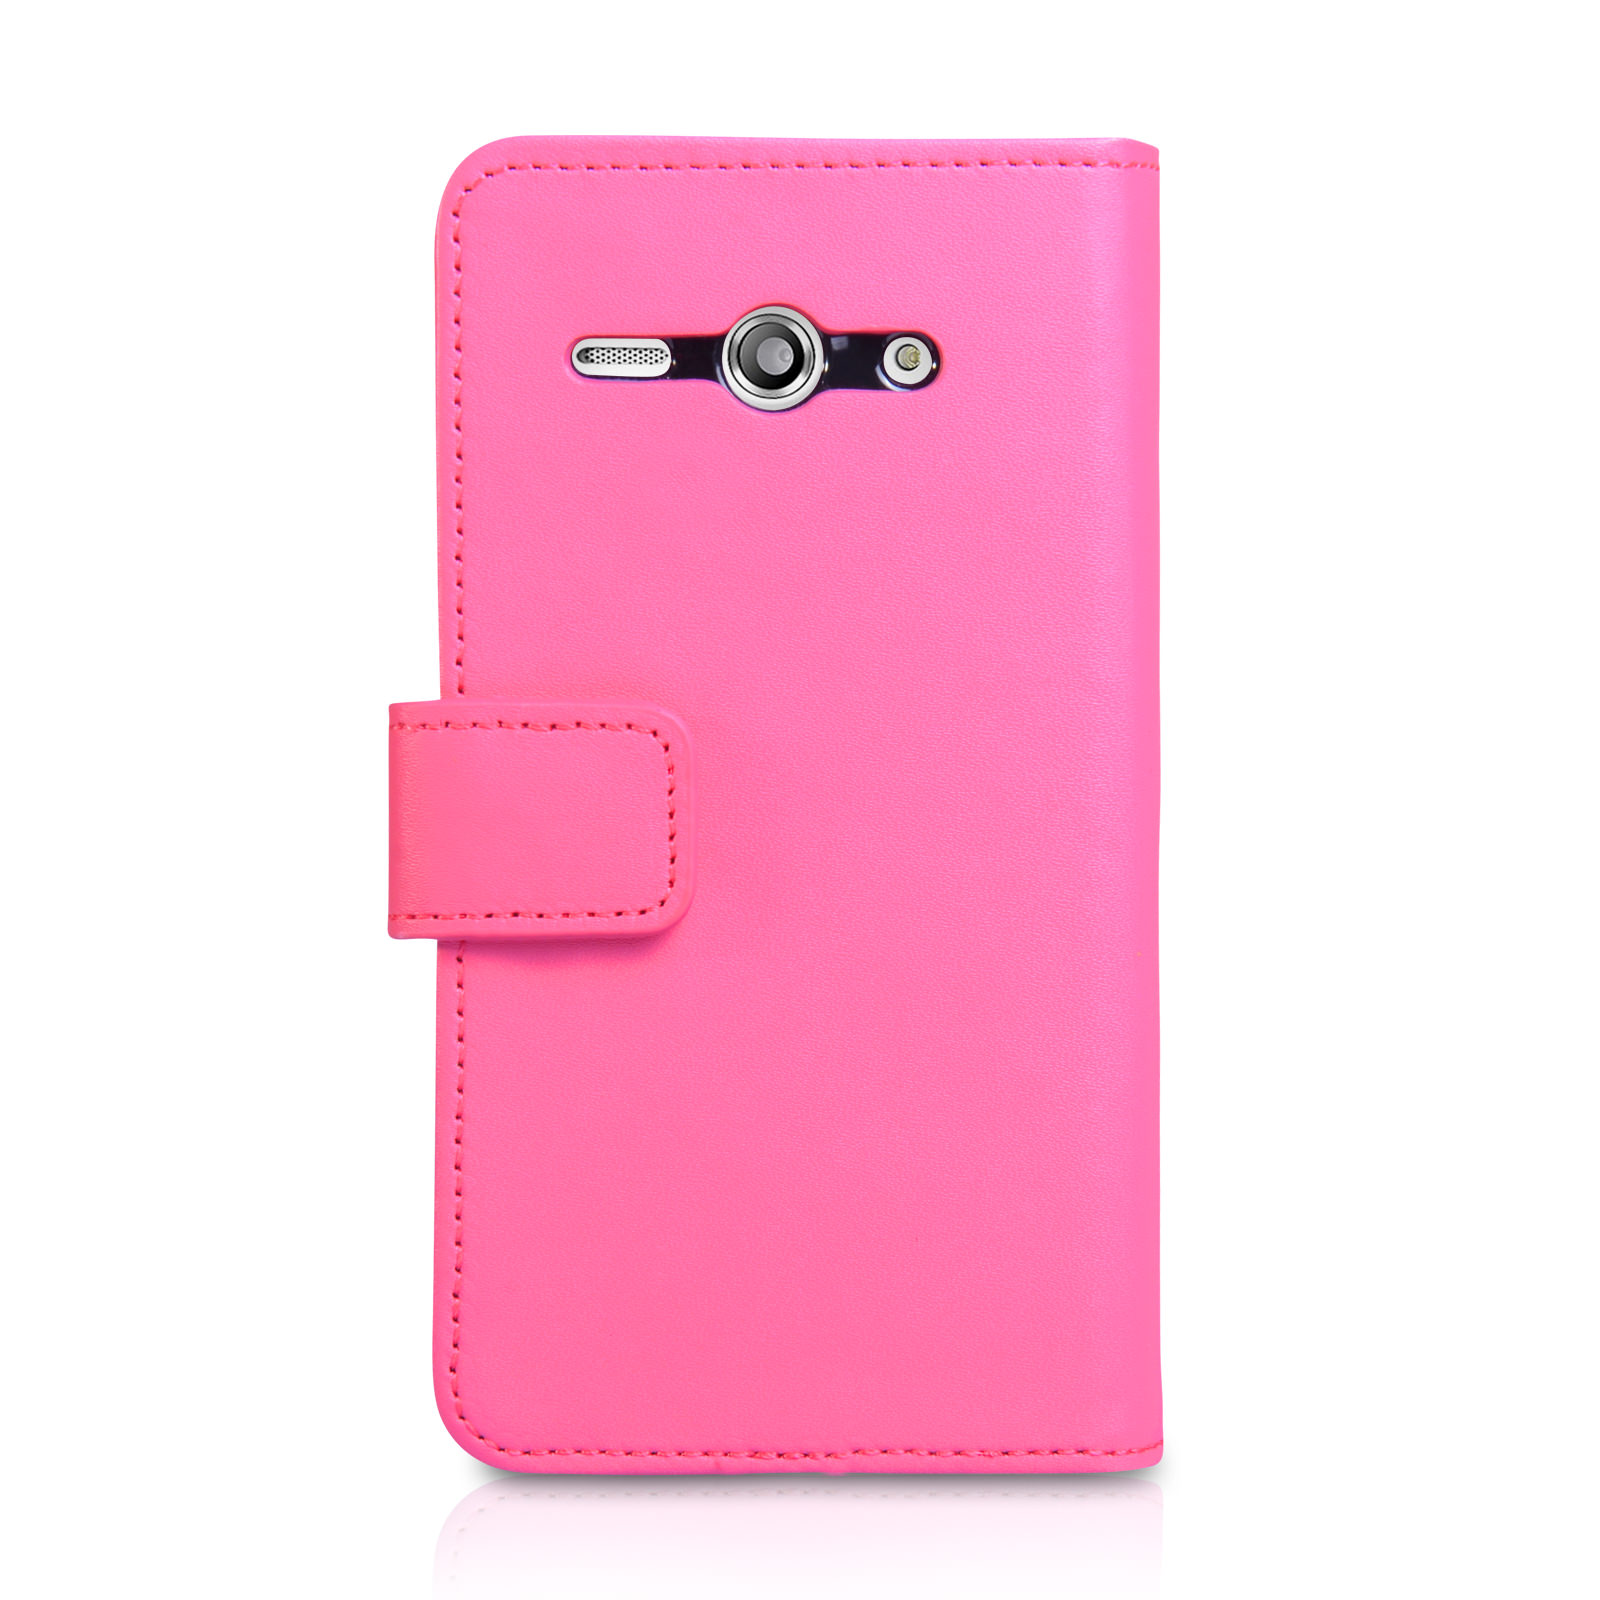 YouSave Huawei Ascend Y530 Leather-Effect Wallet Case - Hot Pink